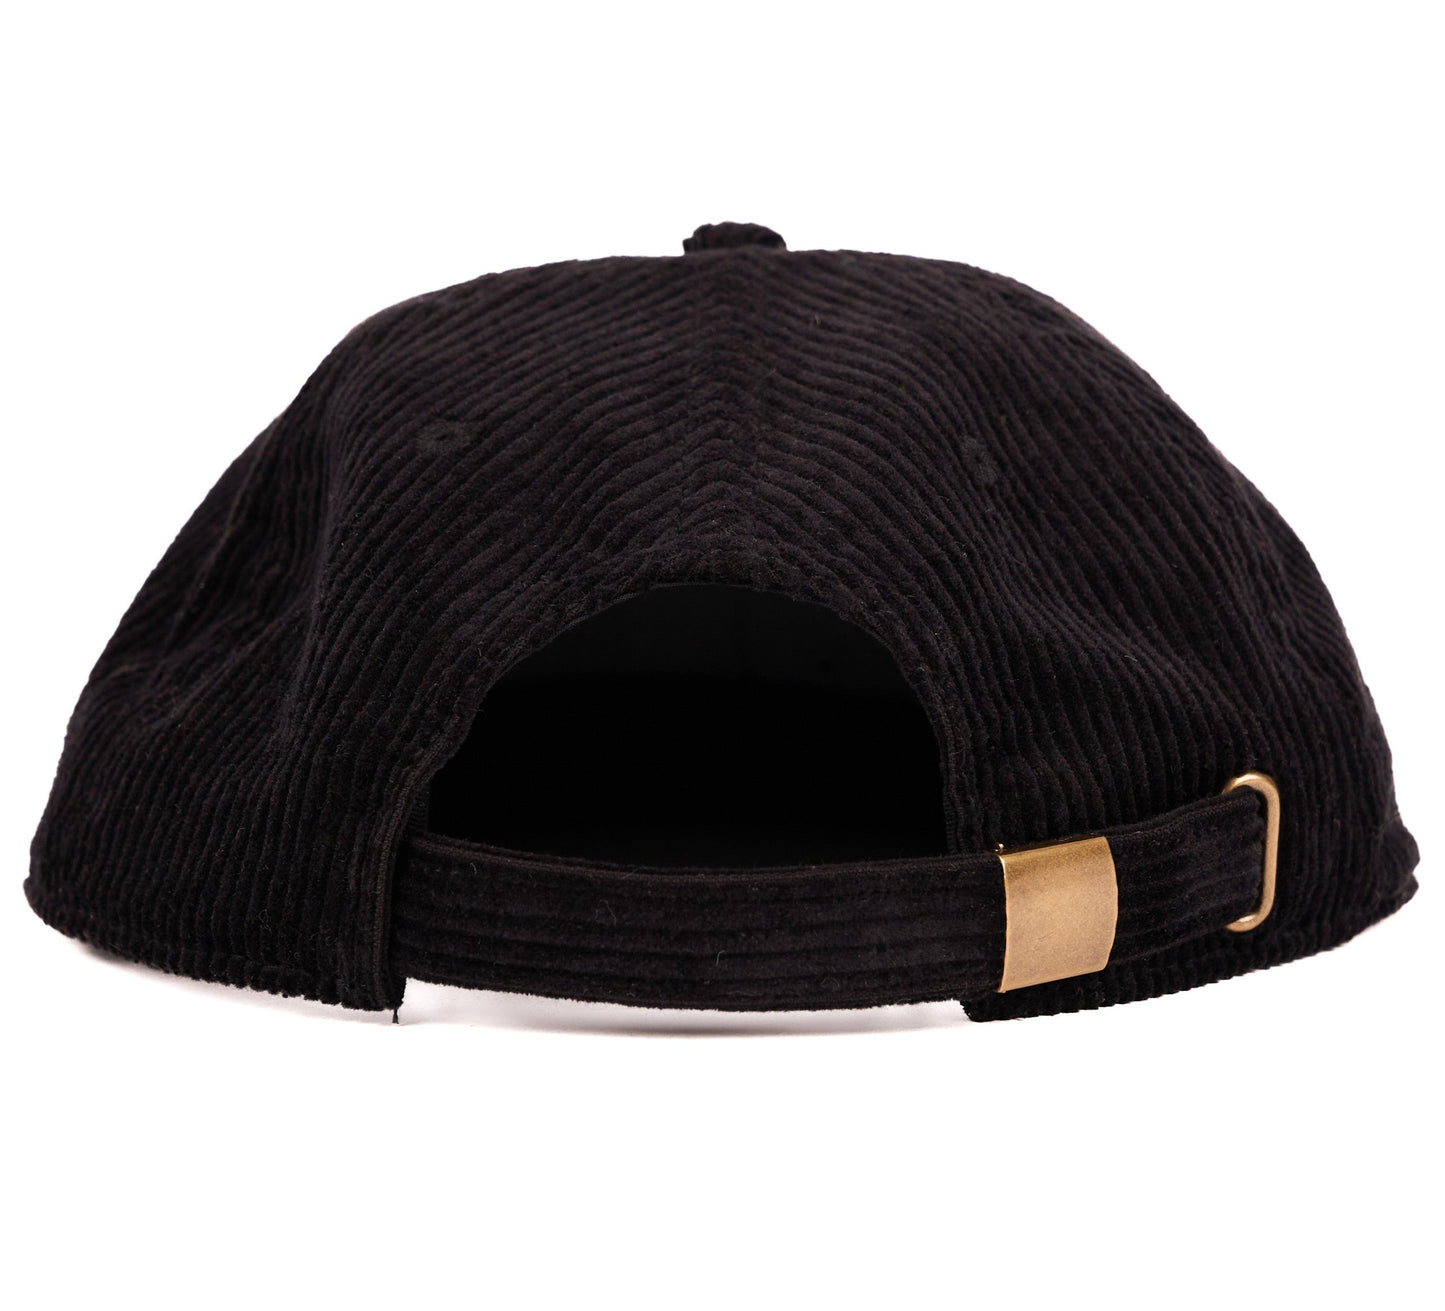 Mouth-Peace Hat - Black Cord